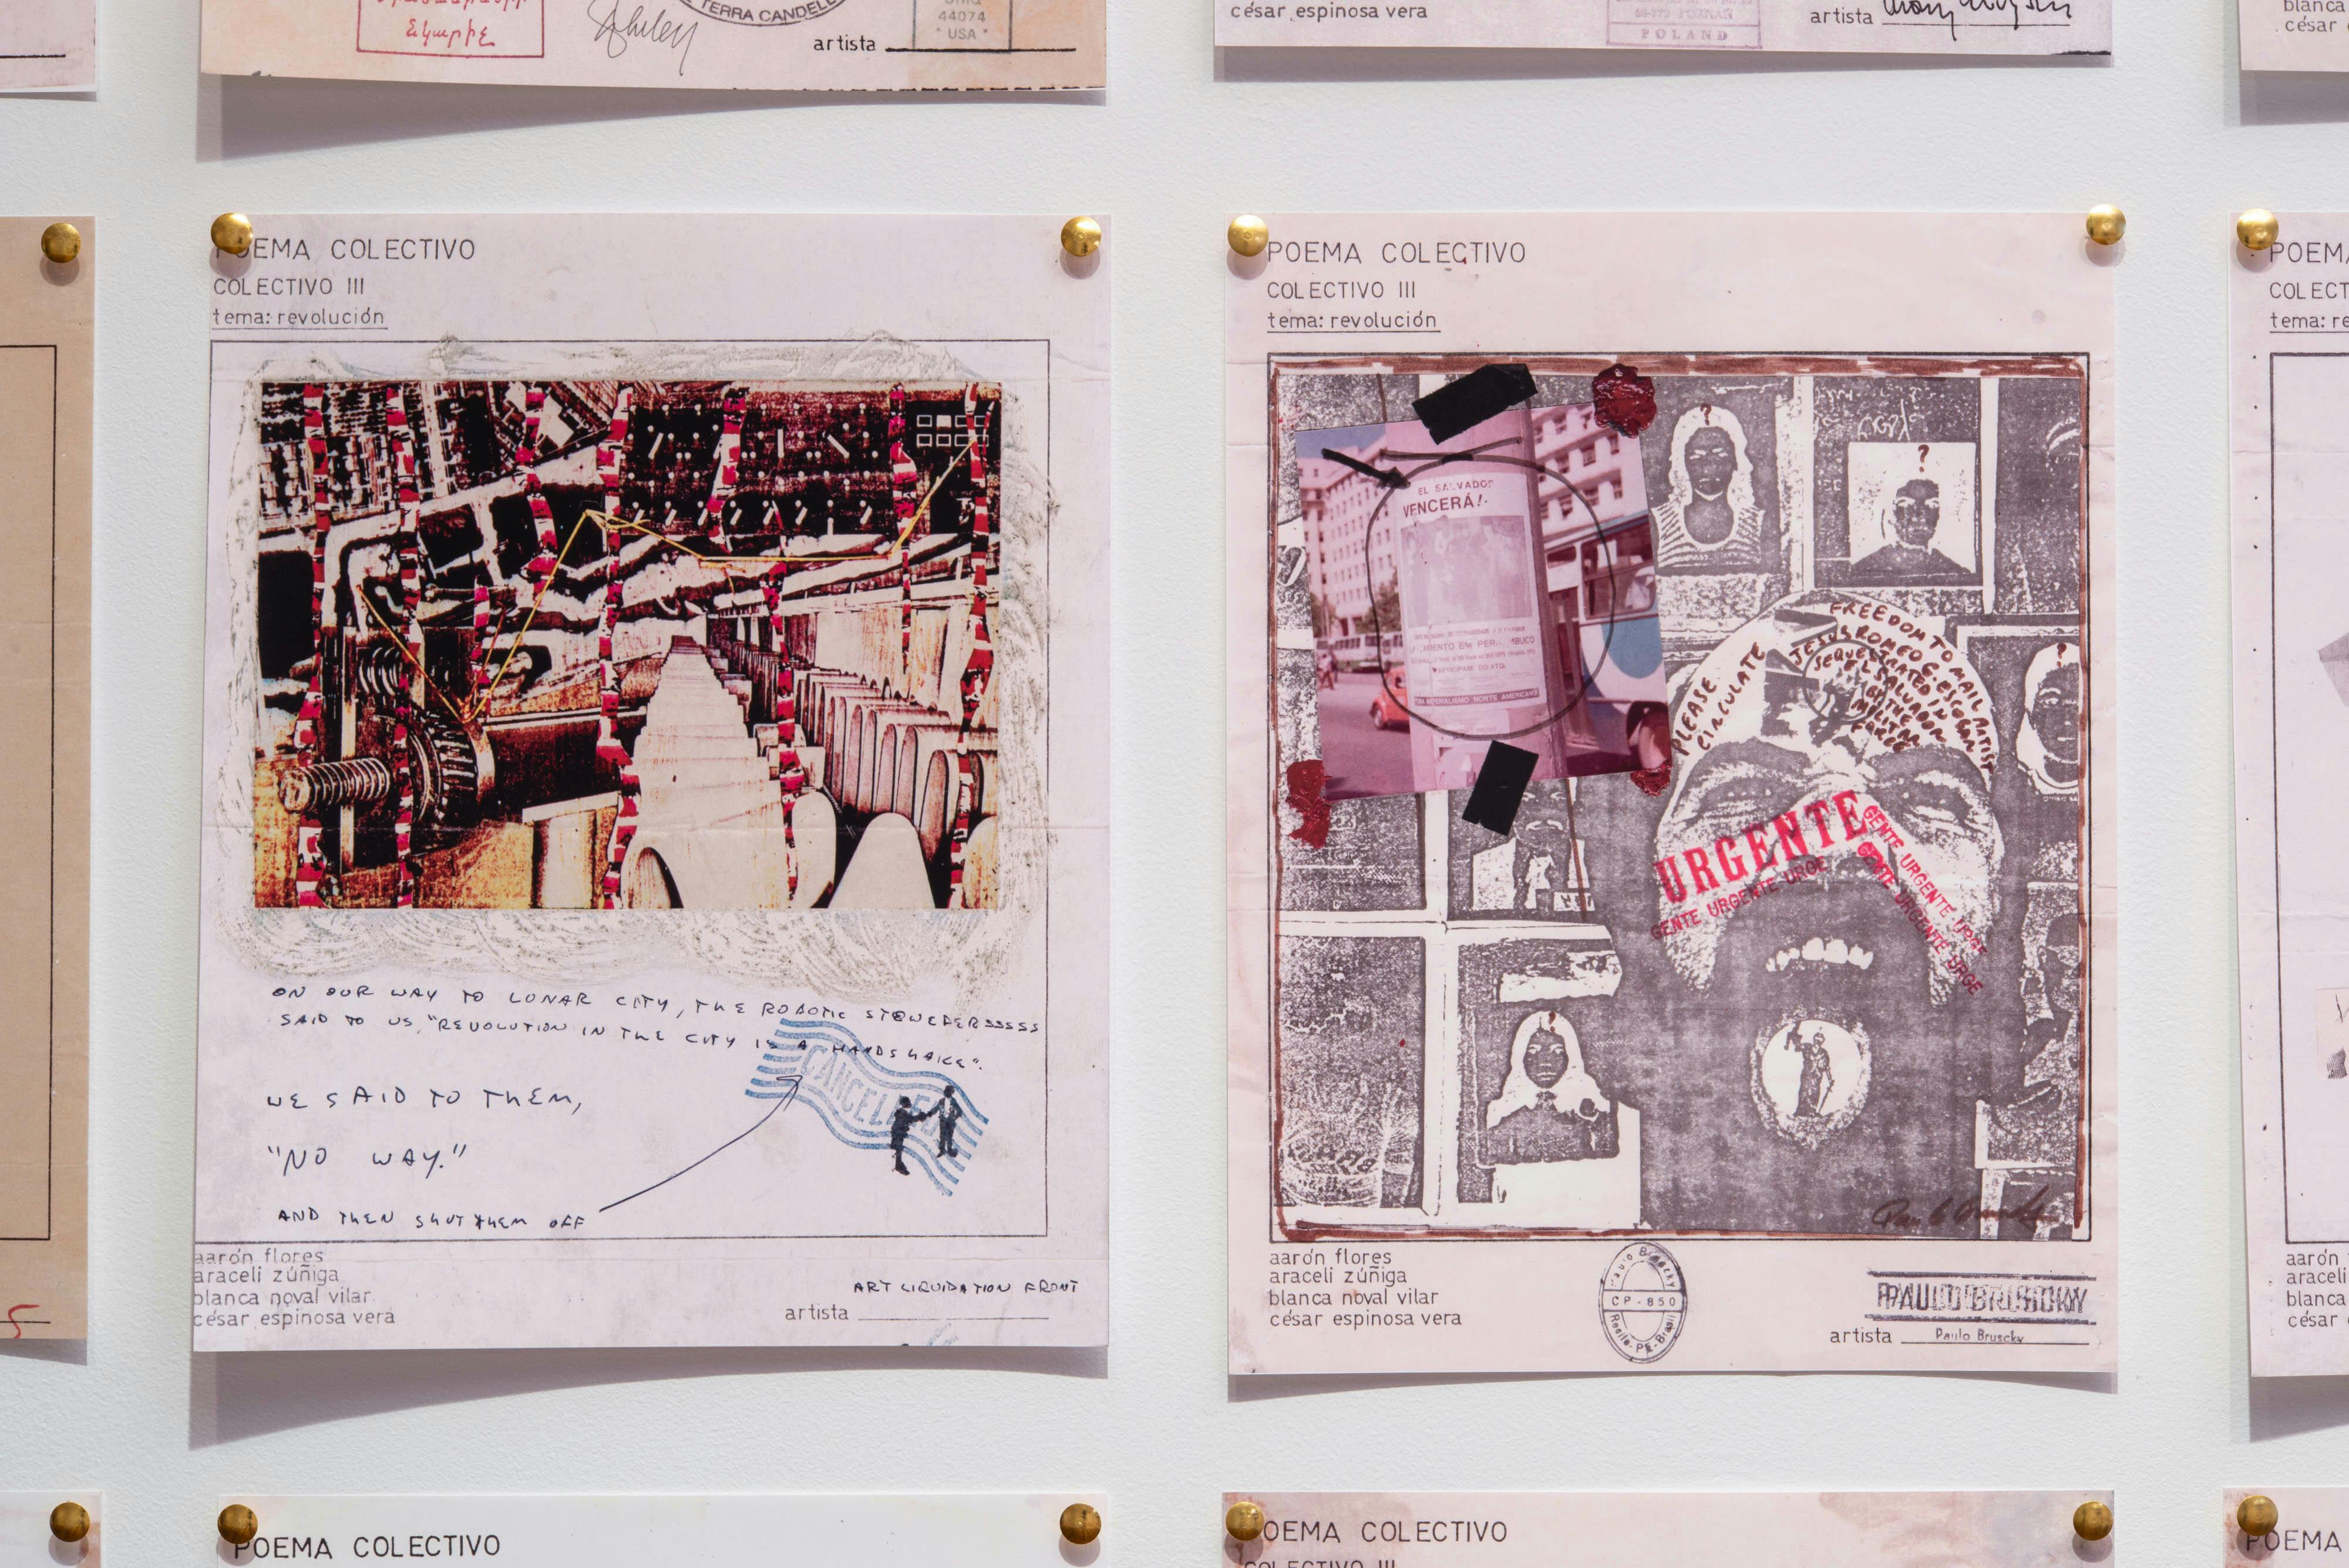 Close up view of two collages in the Poema Colectivo Revolución exhibition.